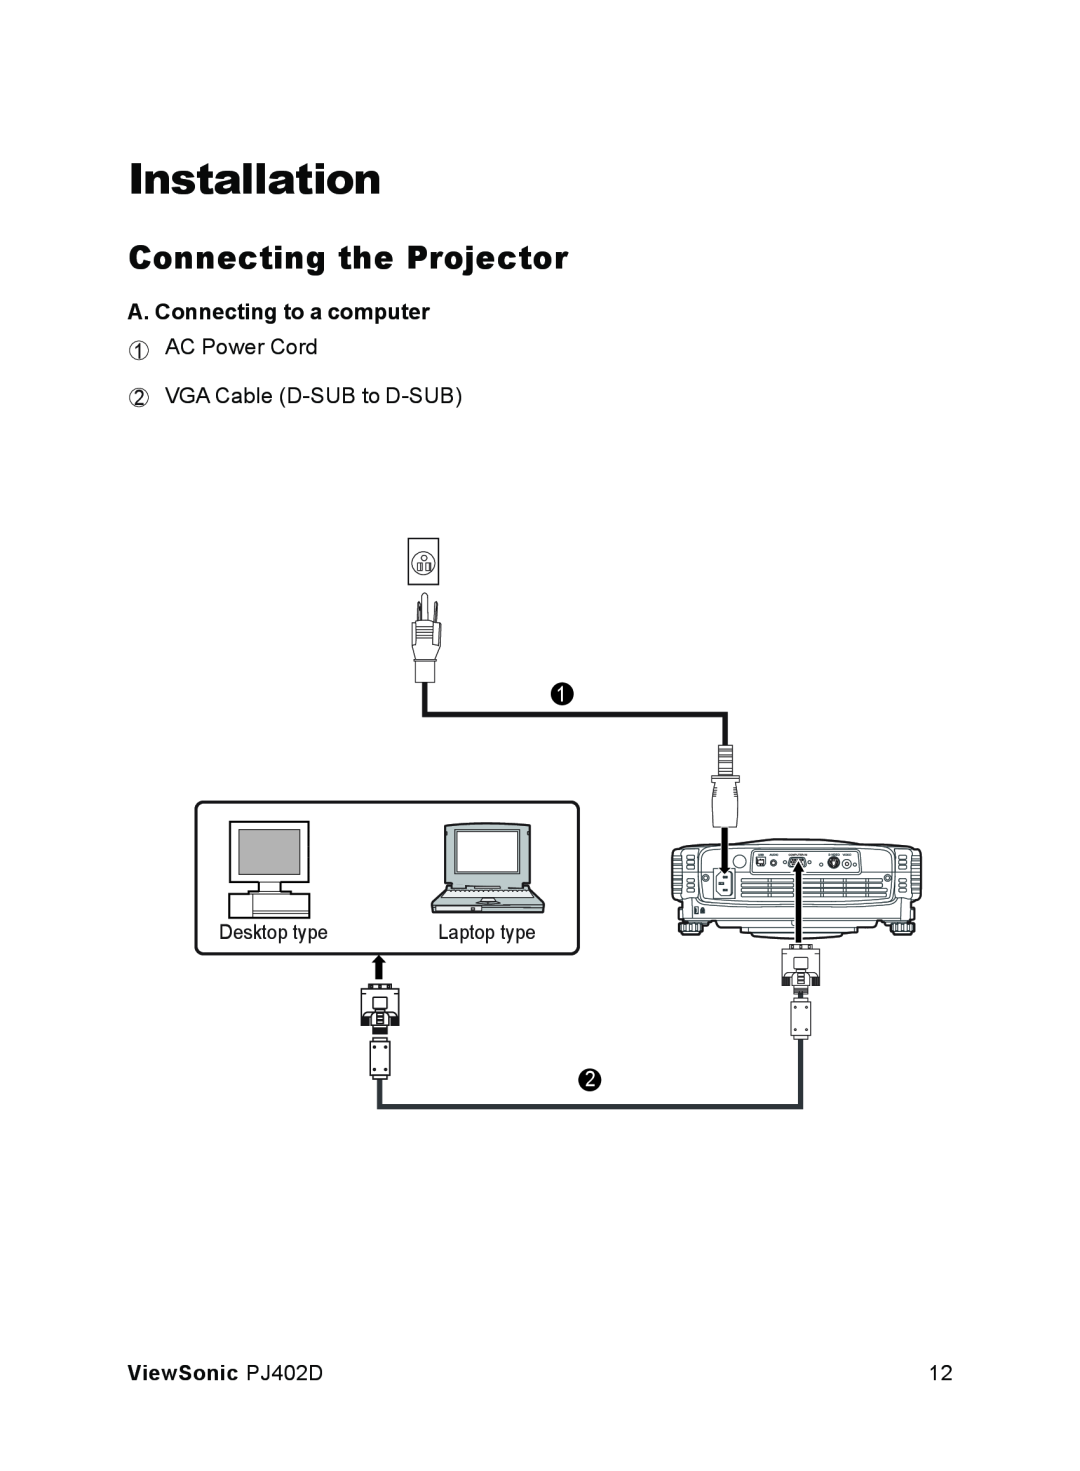 ViewSonic PJ402D manual Installation, Connecting the Projector, Desktop type, Laptop type 